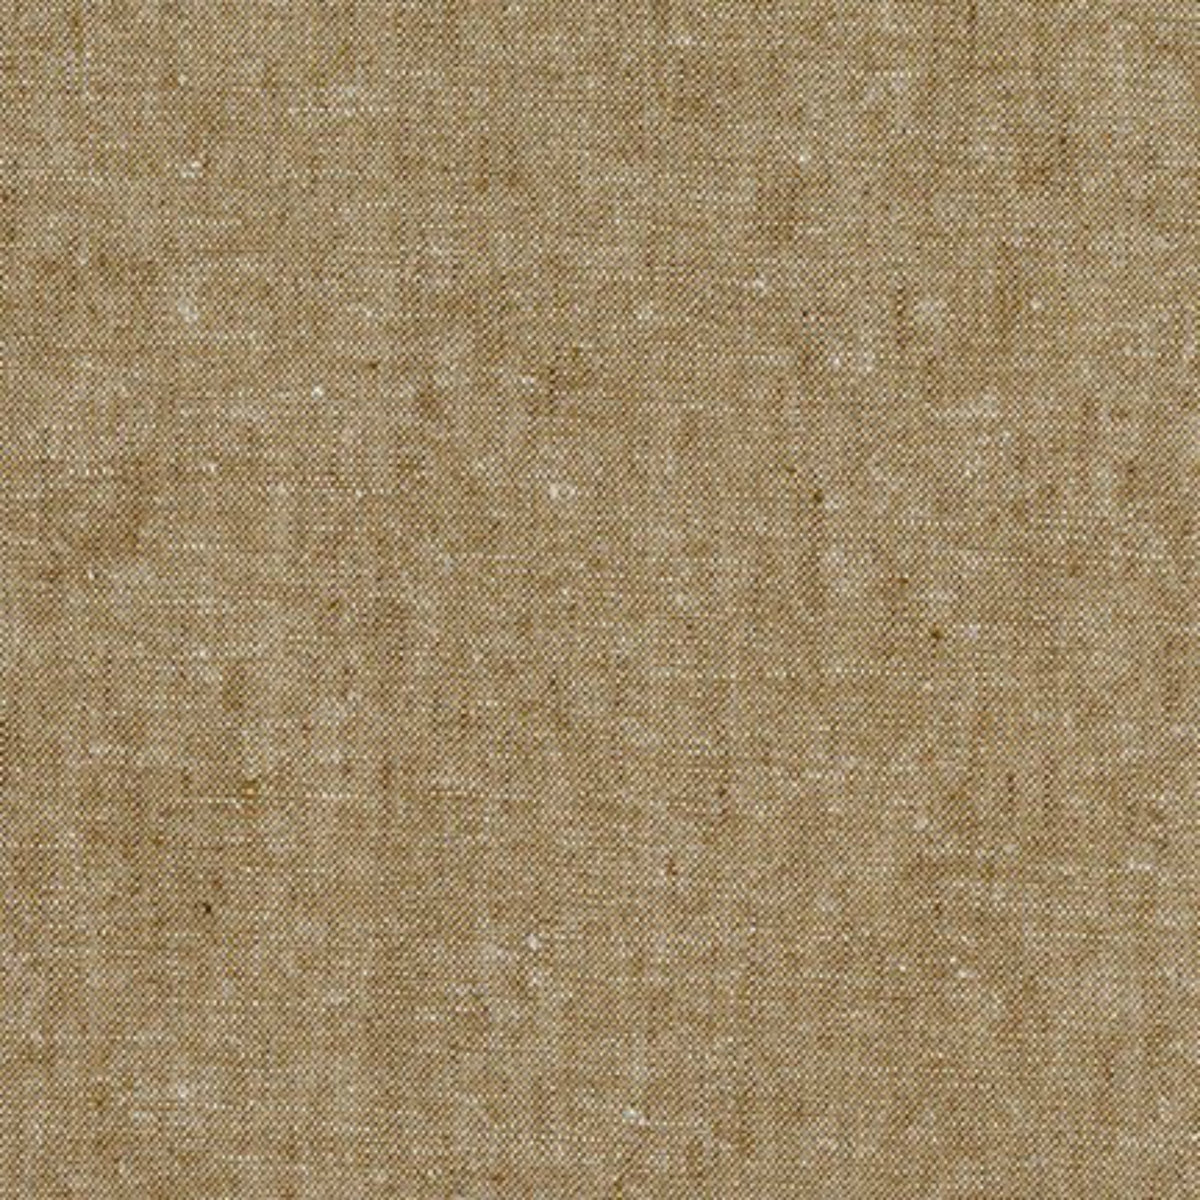 products/EssexTaupe.jpg